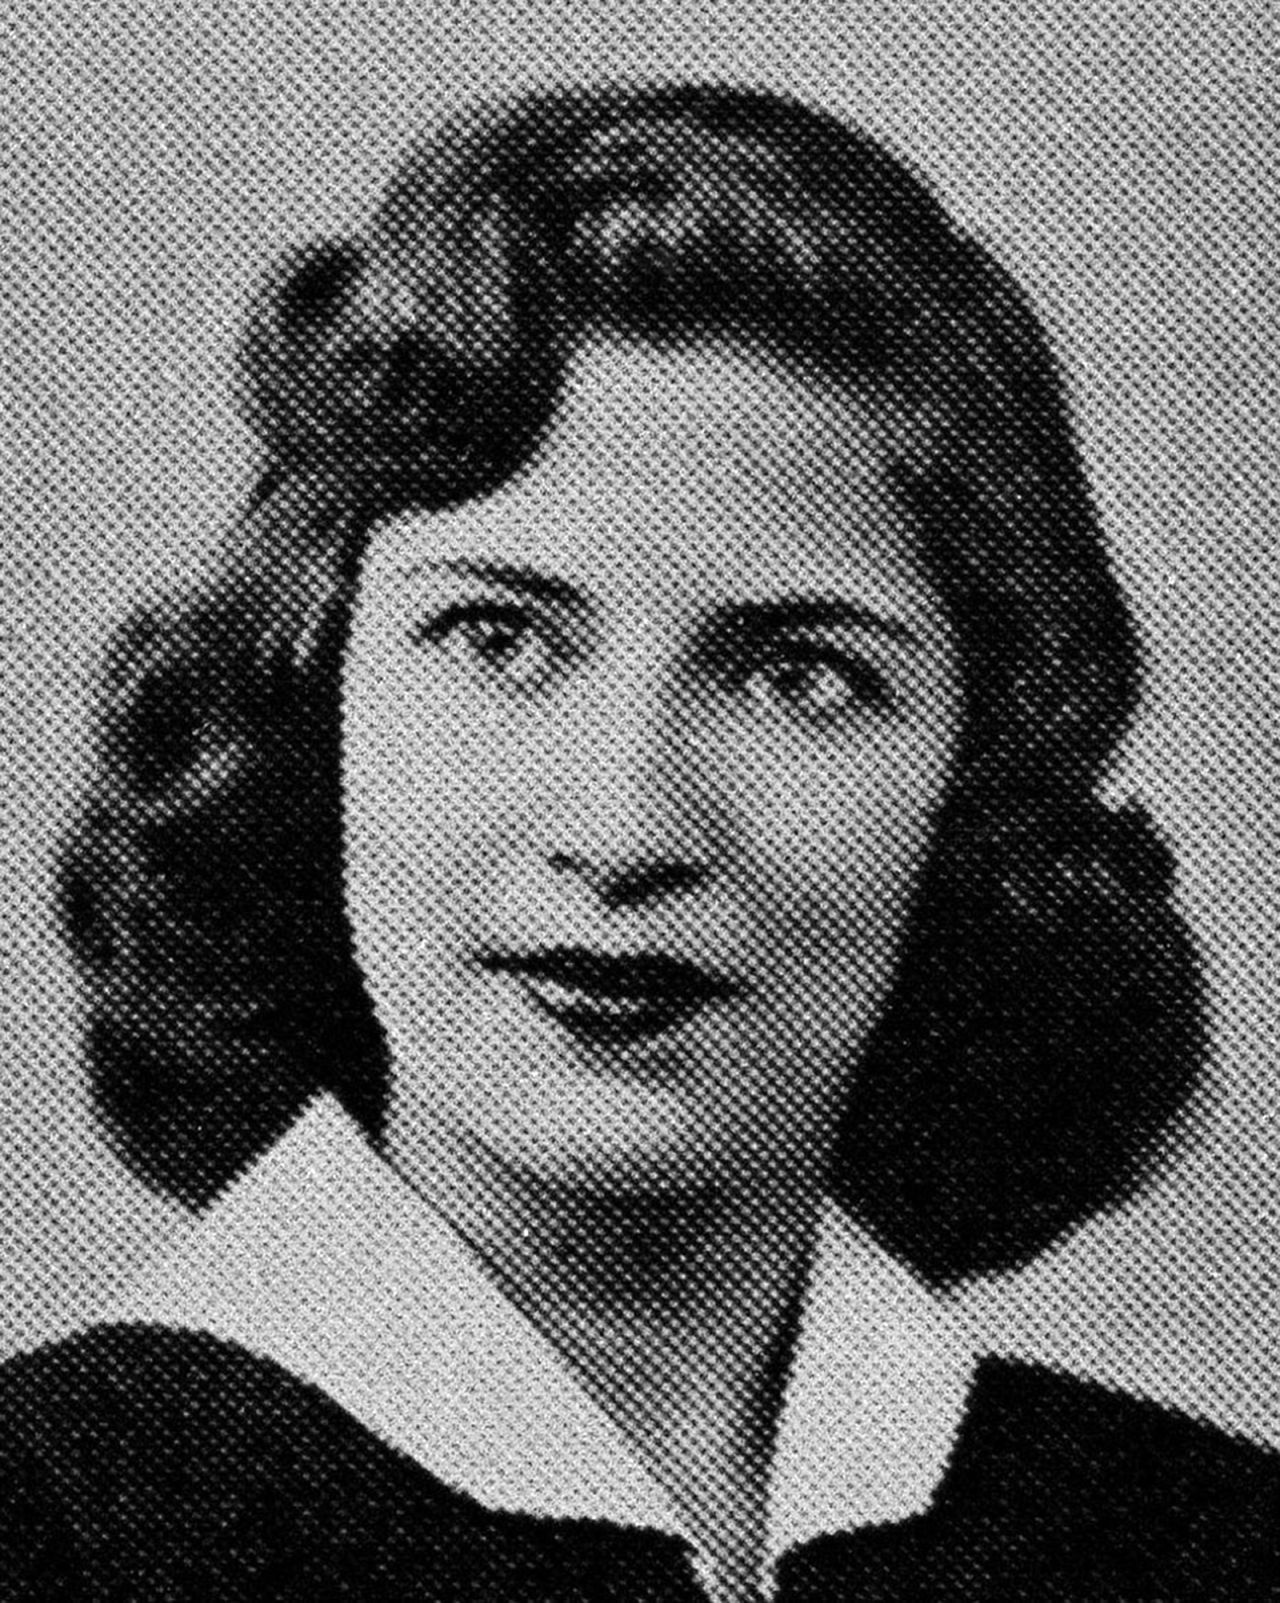 A photo of Ginsburg from her high school yearbook.